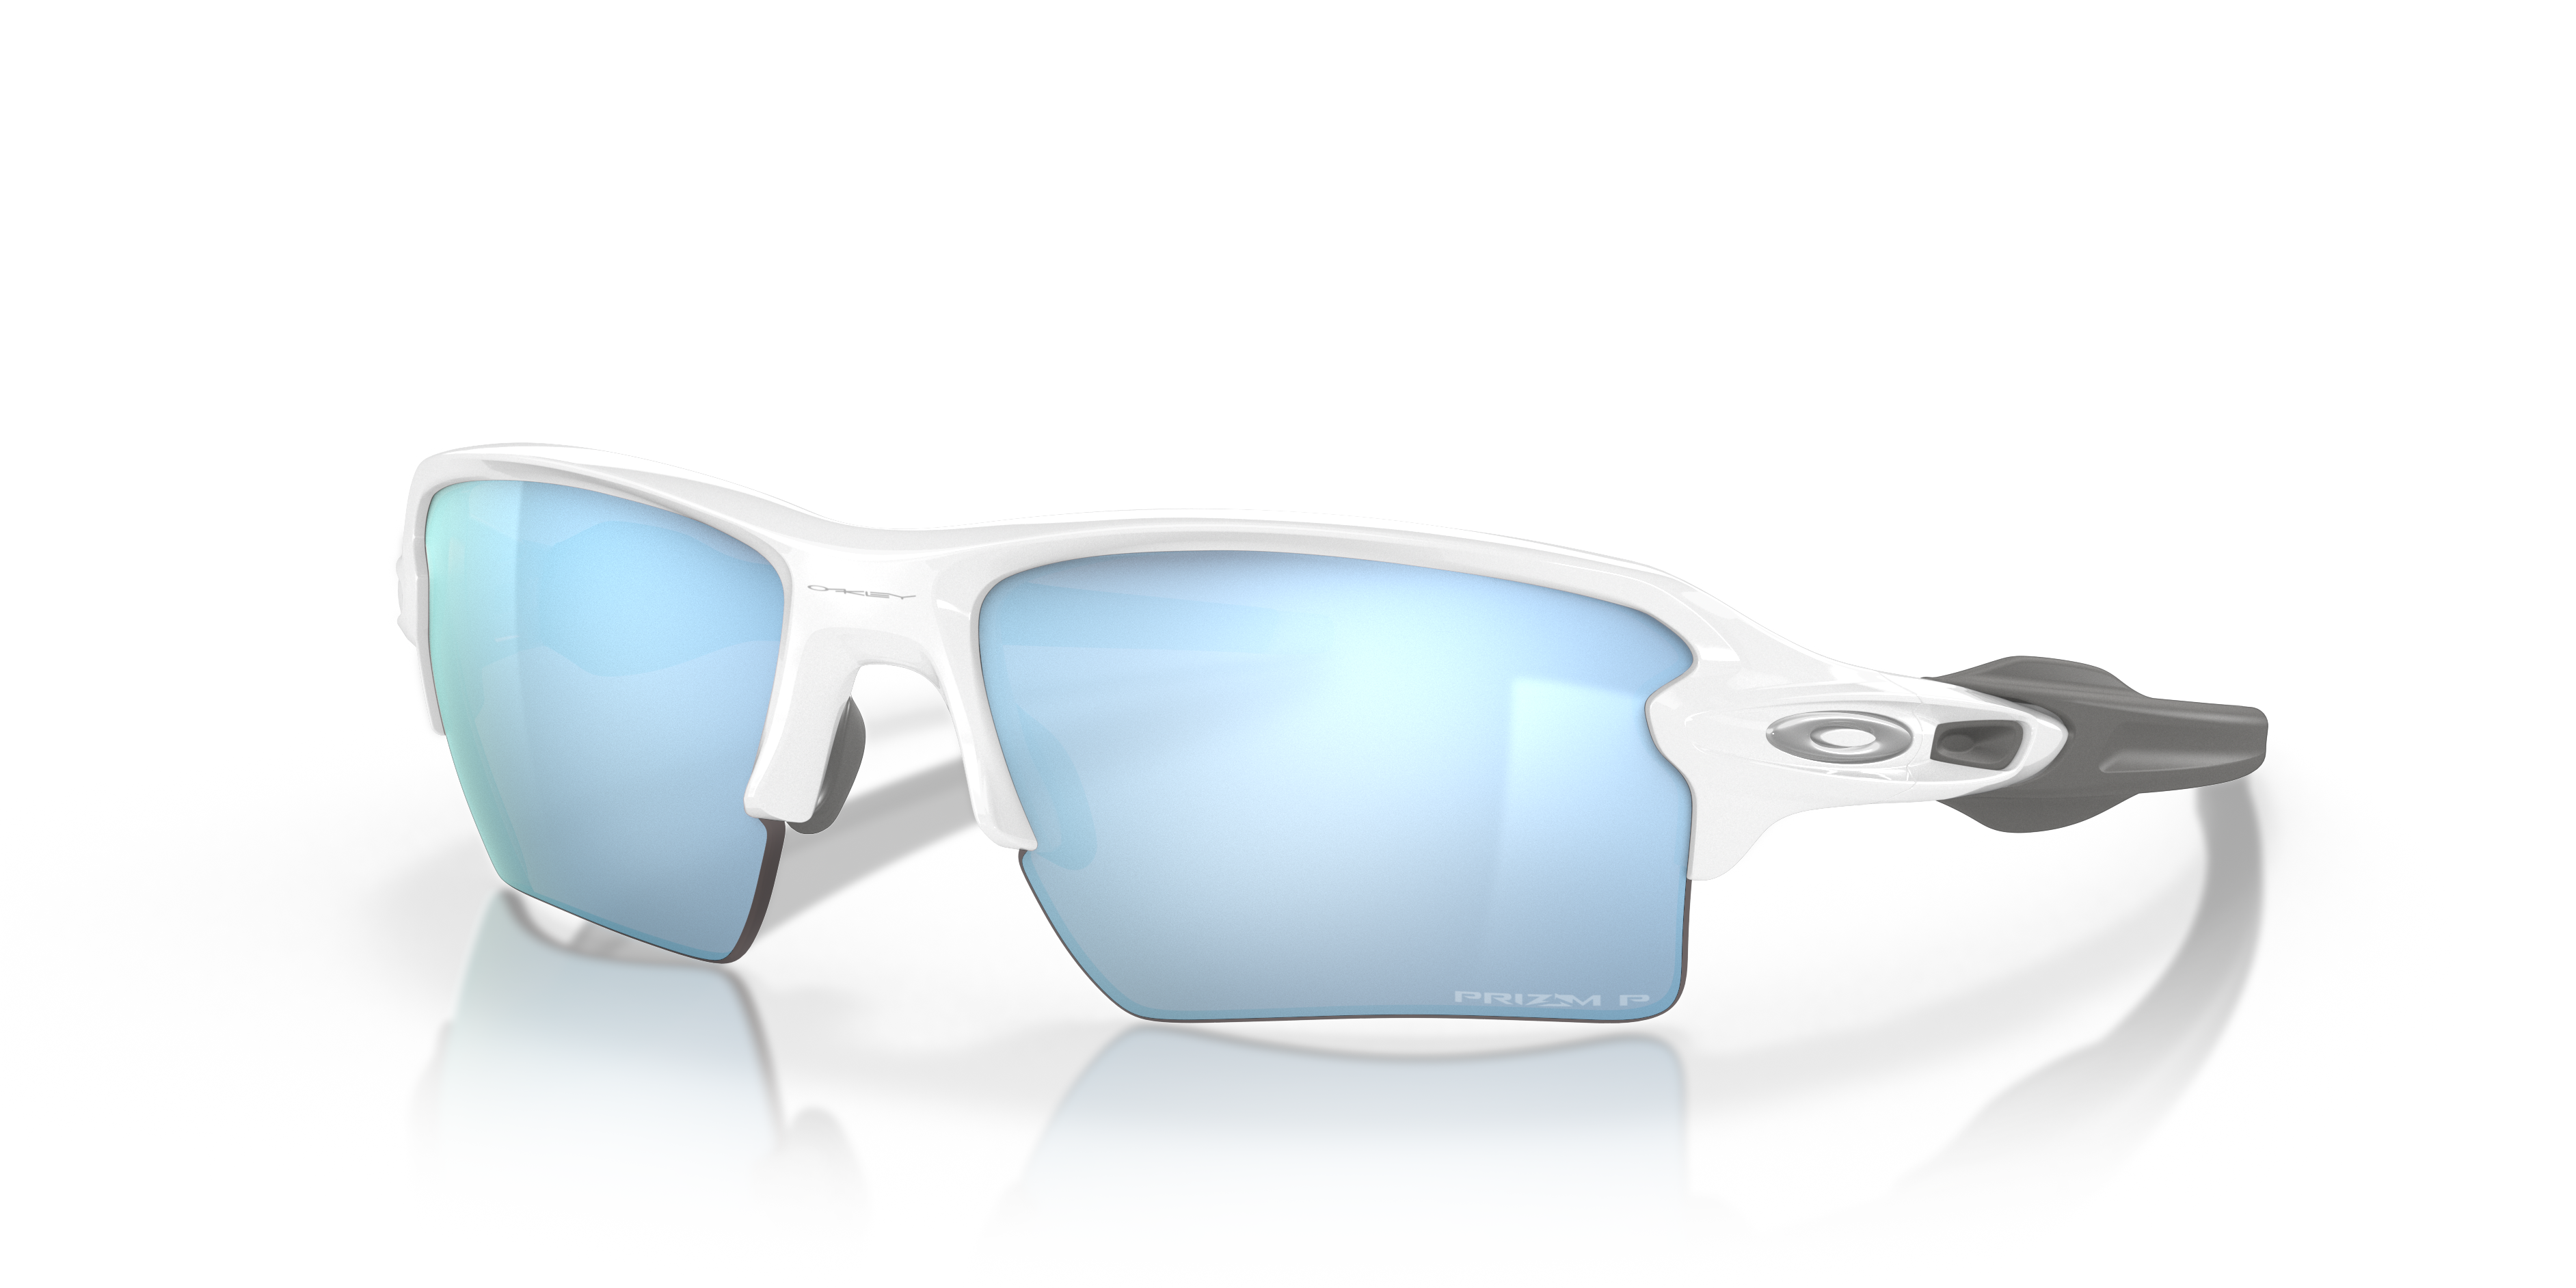 blue and white oakleys